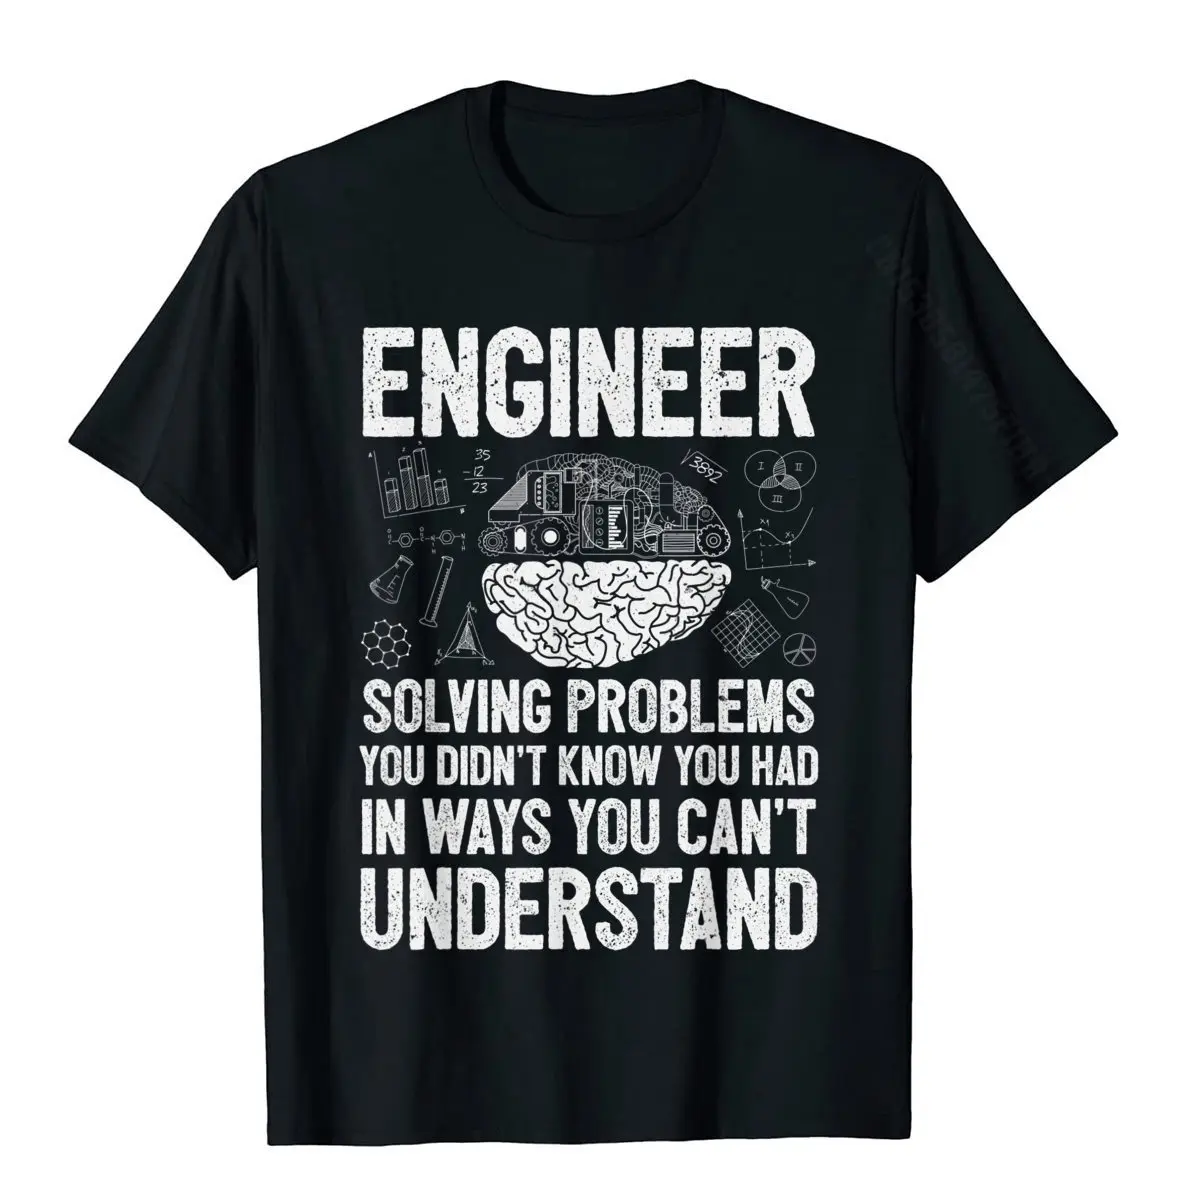 Engineer Solving Problems You Didn't Know You Had Funny Gift T-Shirt Graphic Printing Top T-Shirts Cotton Tops Tees For Men